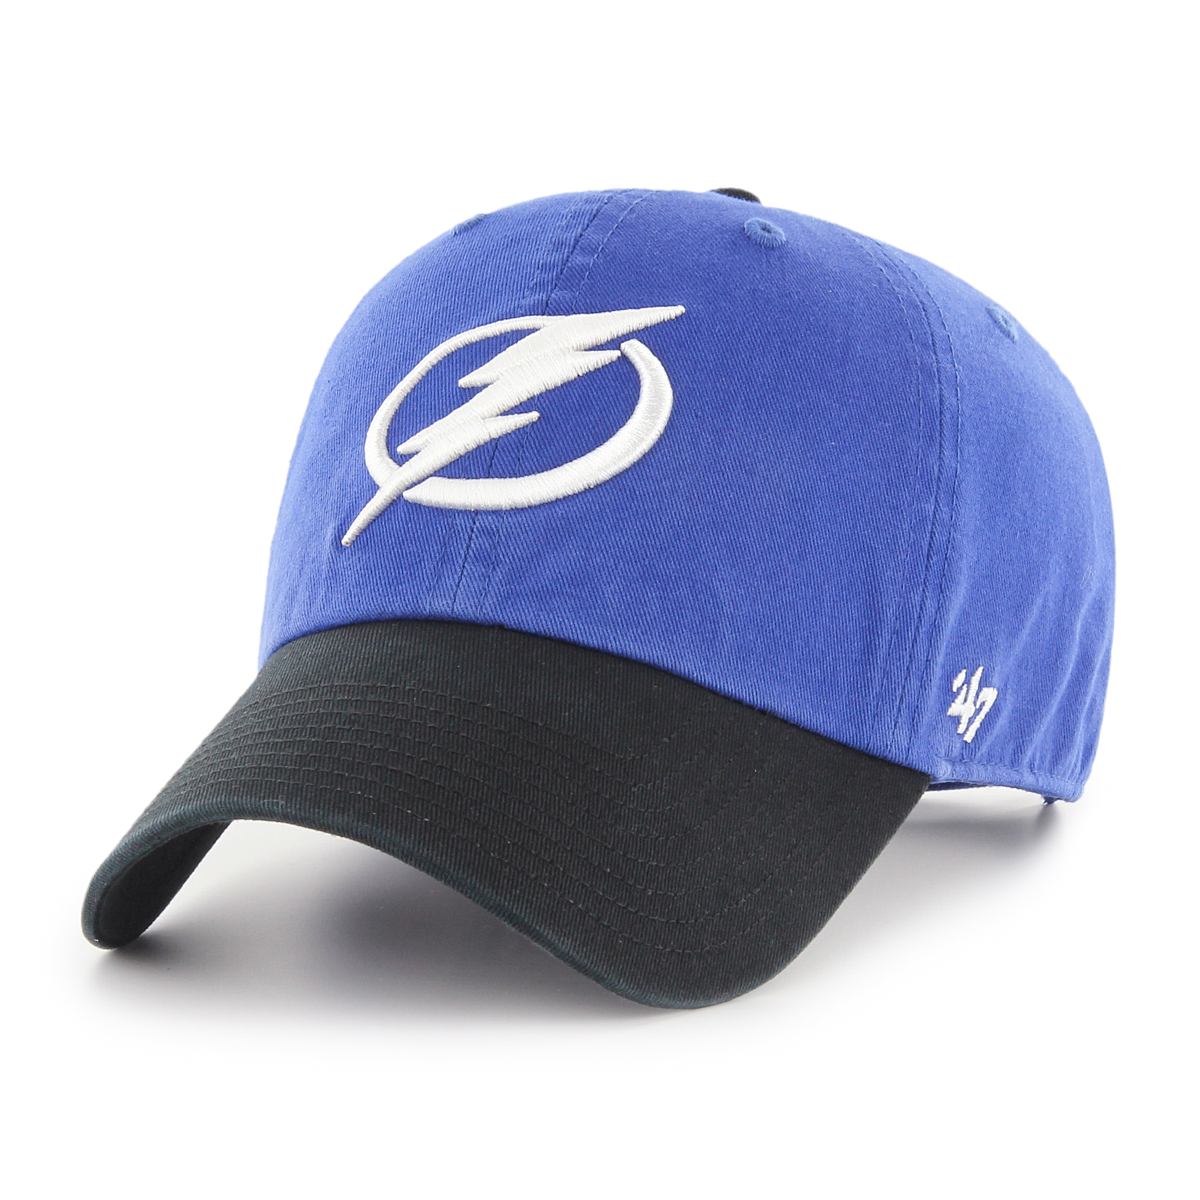 Tampa Bay Lightning '47 Two Tone Adjustable Clean Up Hat